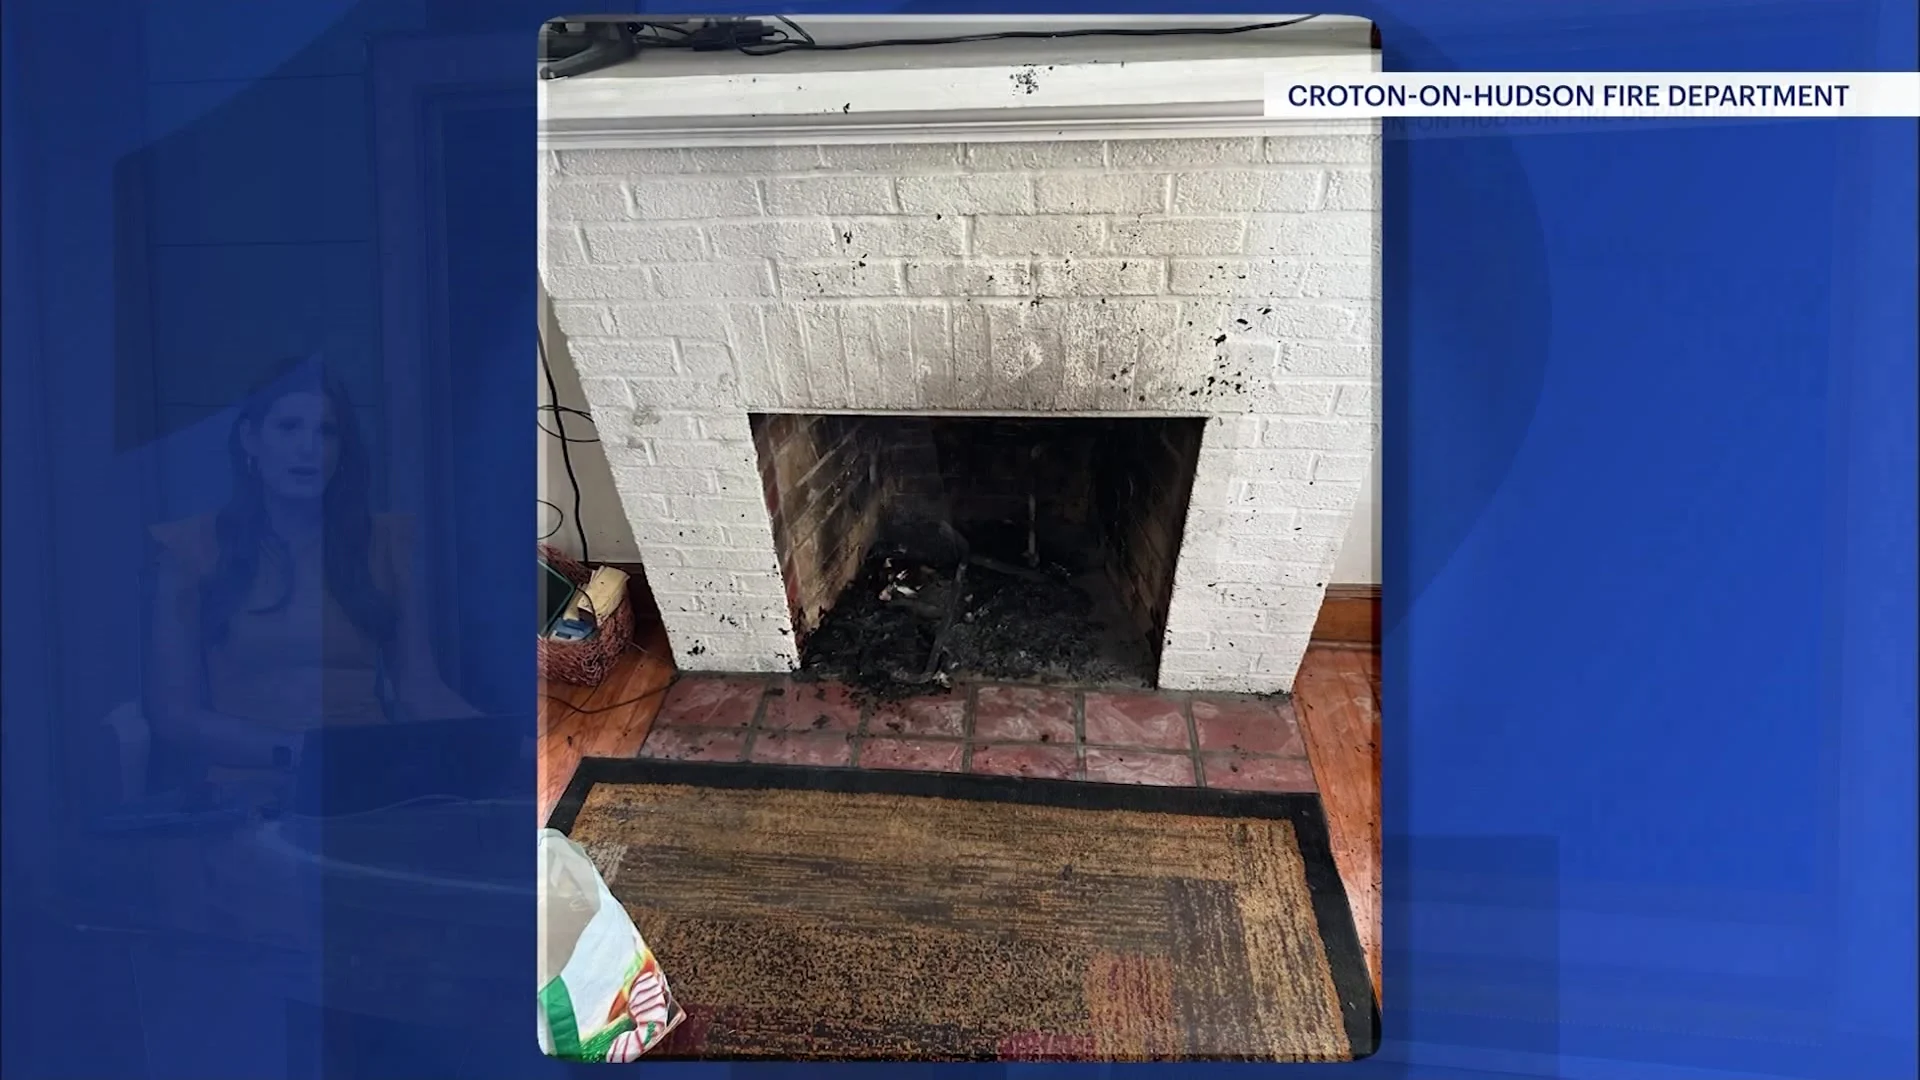 Officials warn against using gasoline to ignite indoor fires following incident at Croton-on-Hudson residence